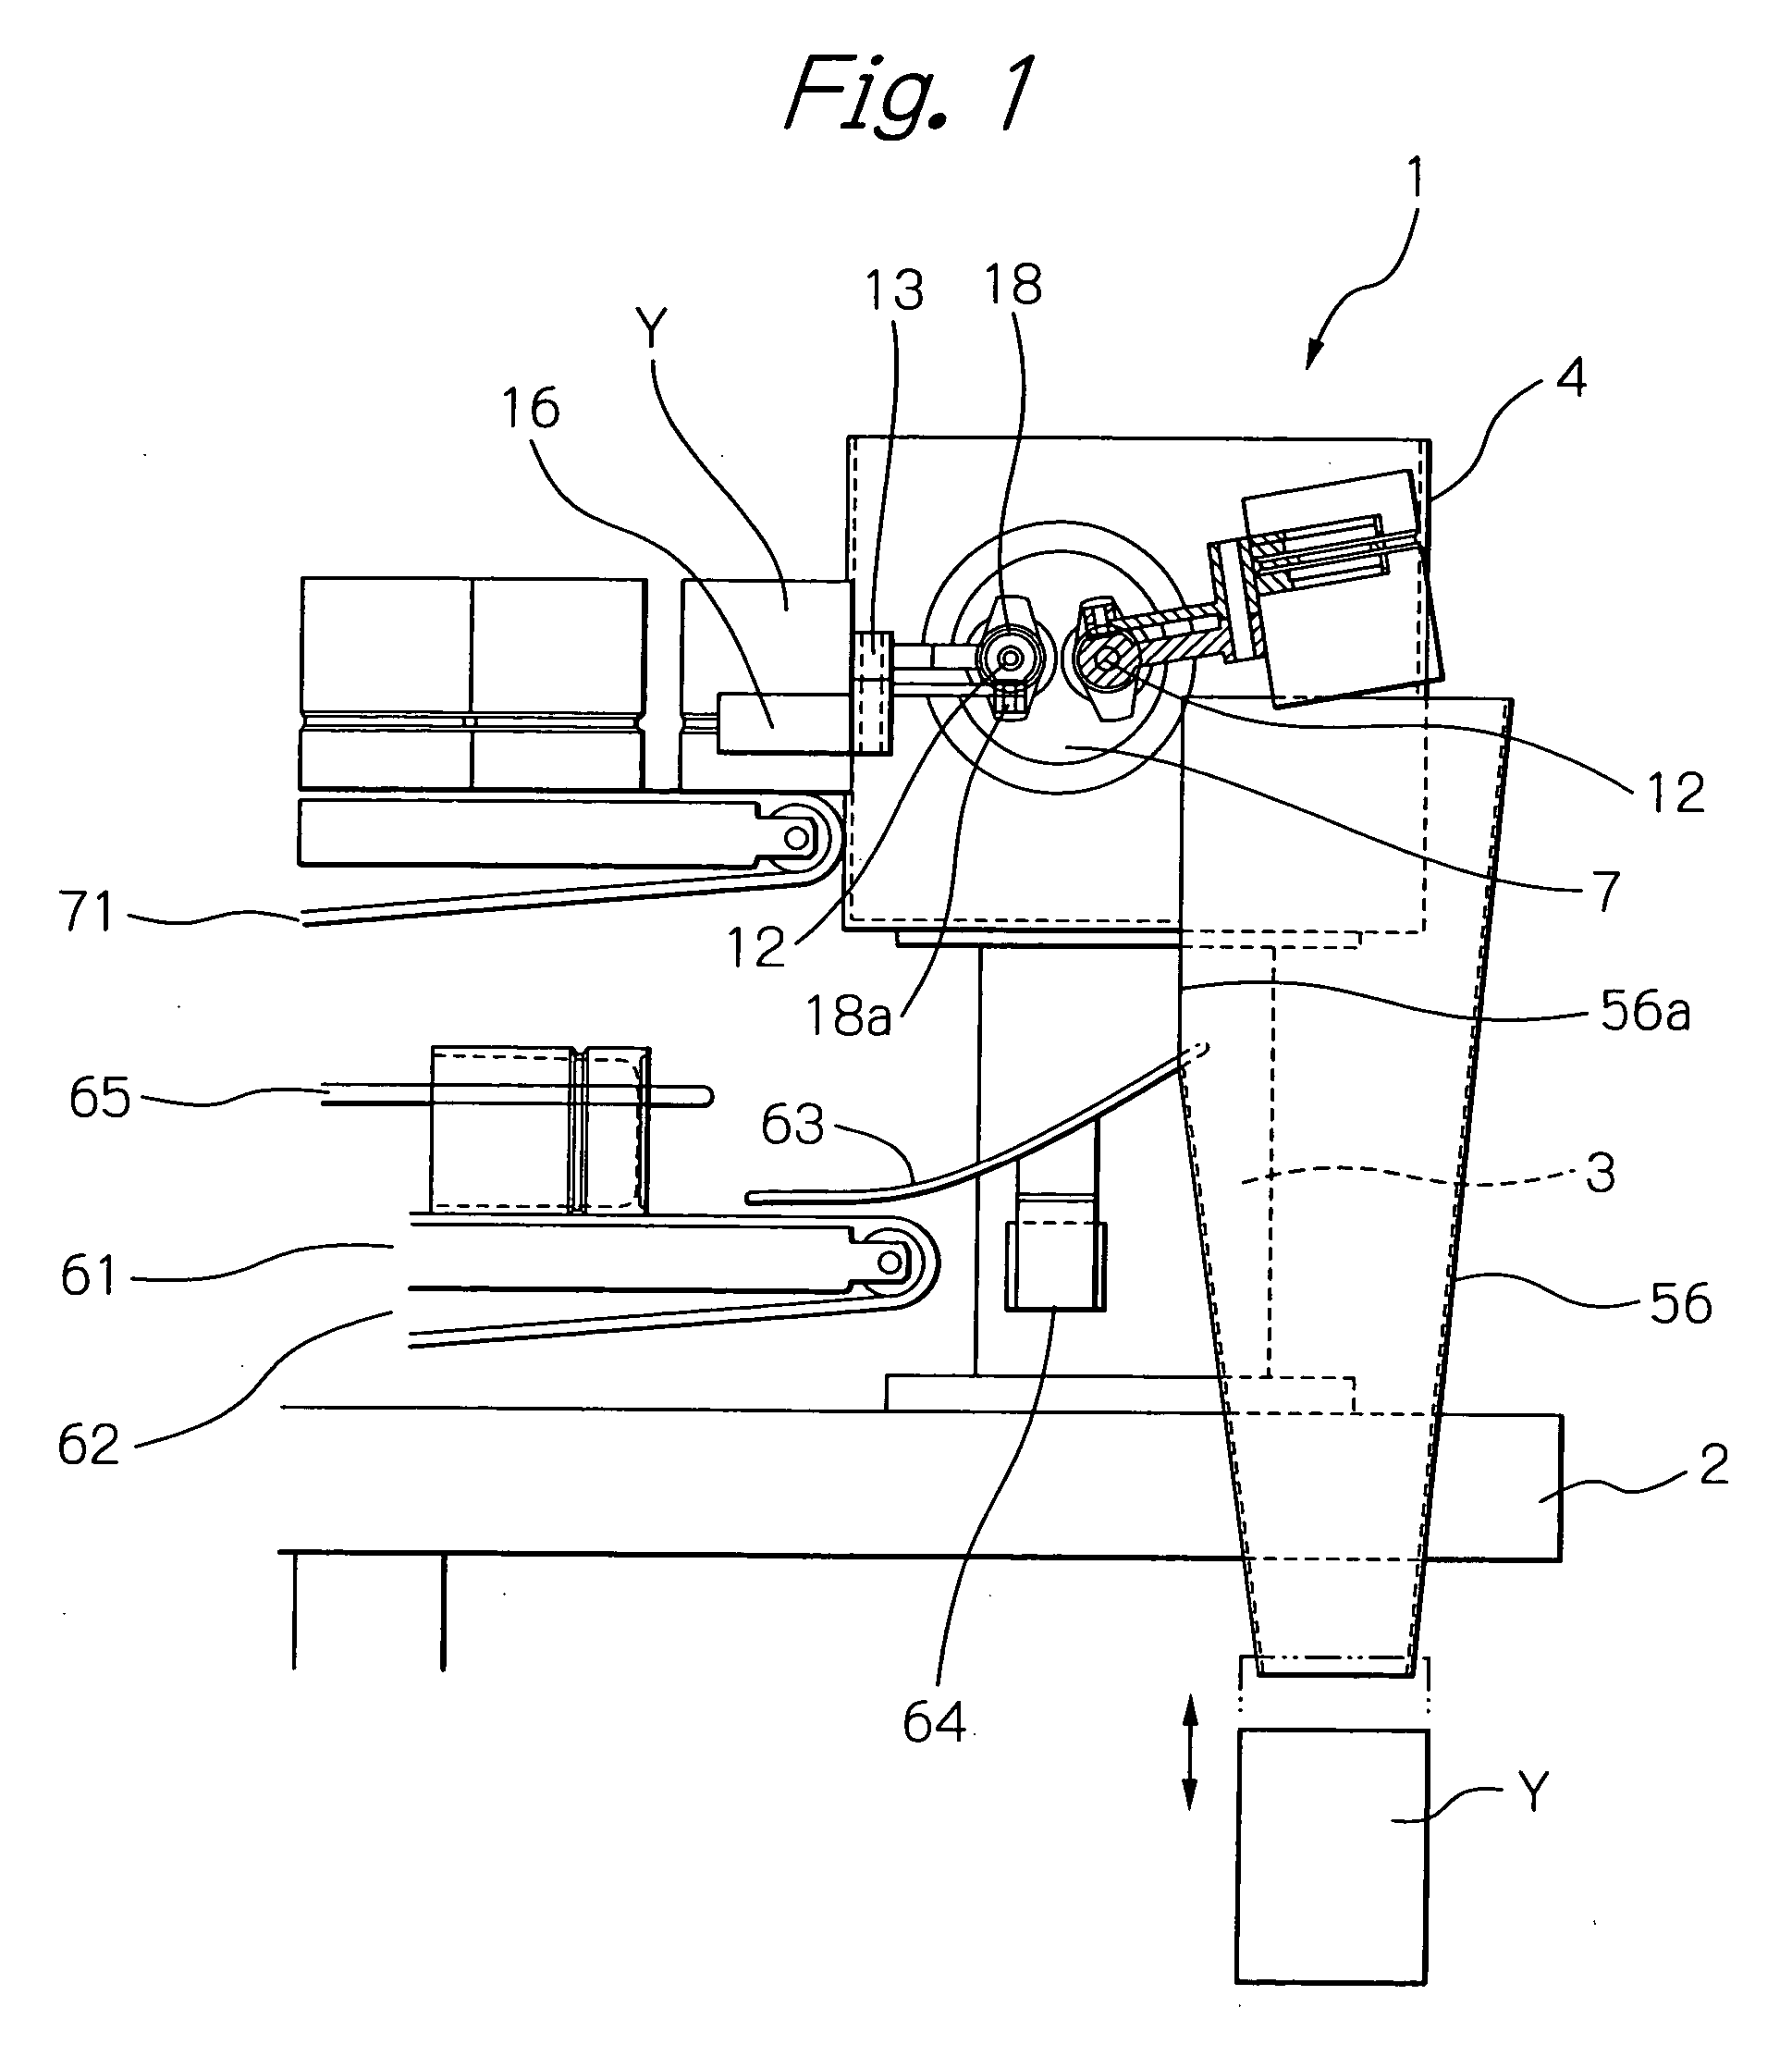 Contents-filling vessel reversing apparatus and a vessel for use with the apparatus